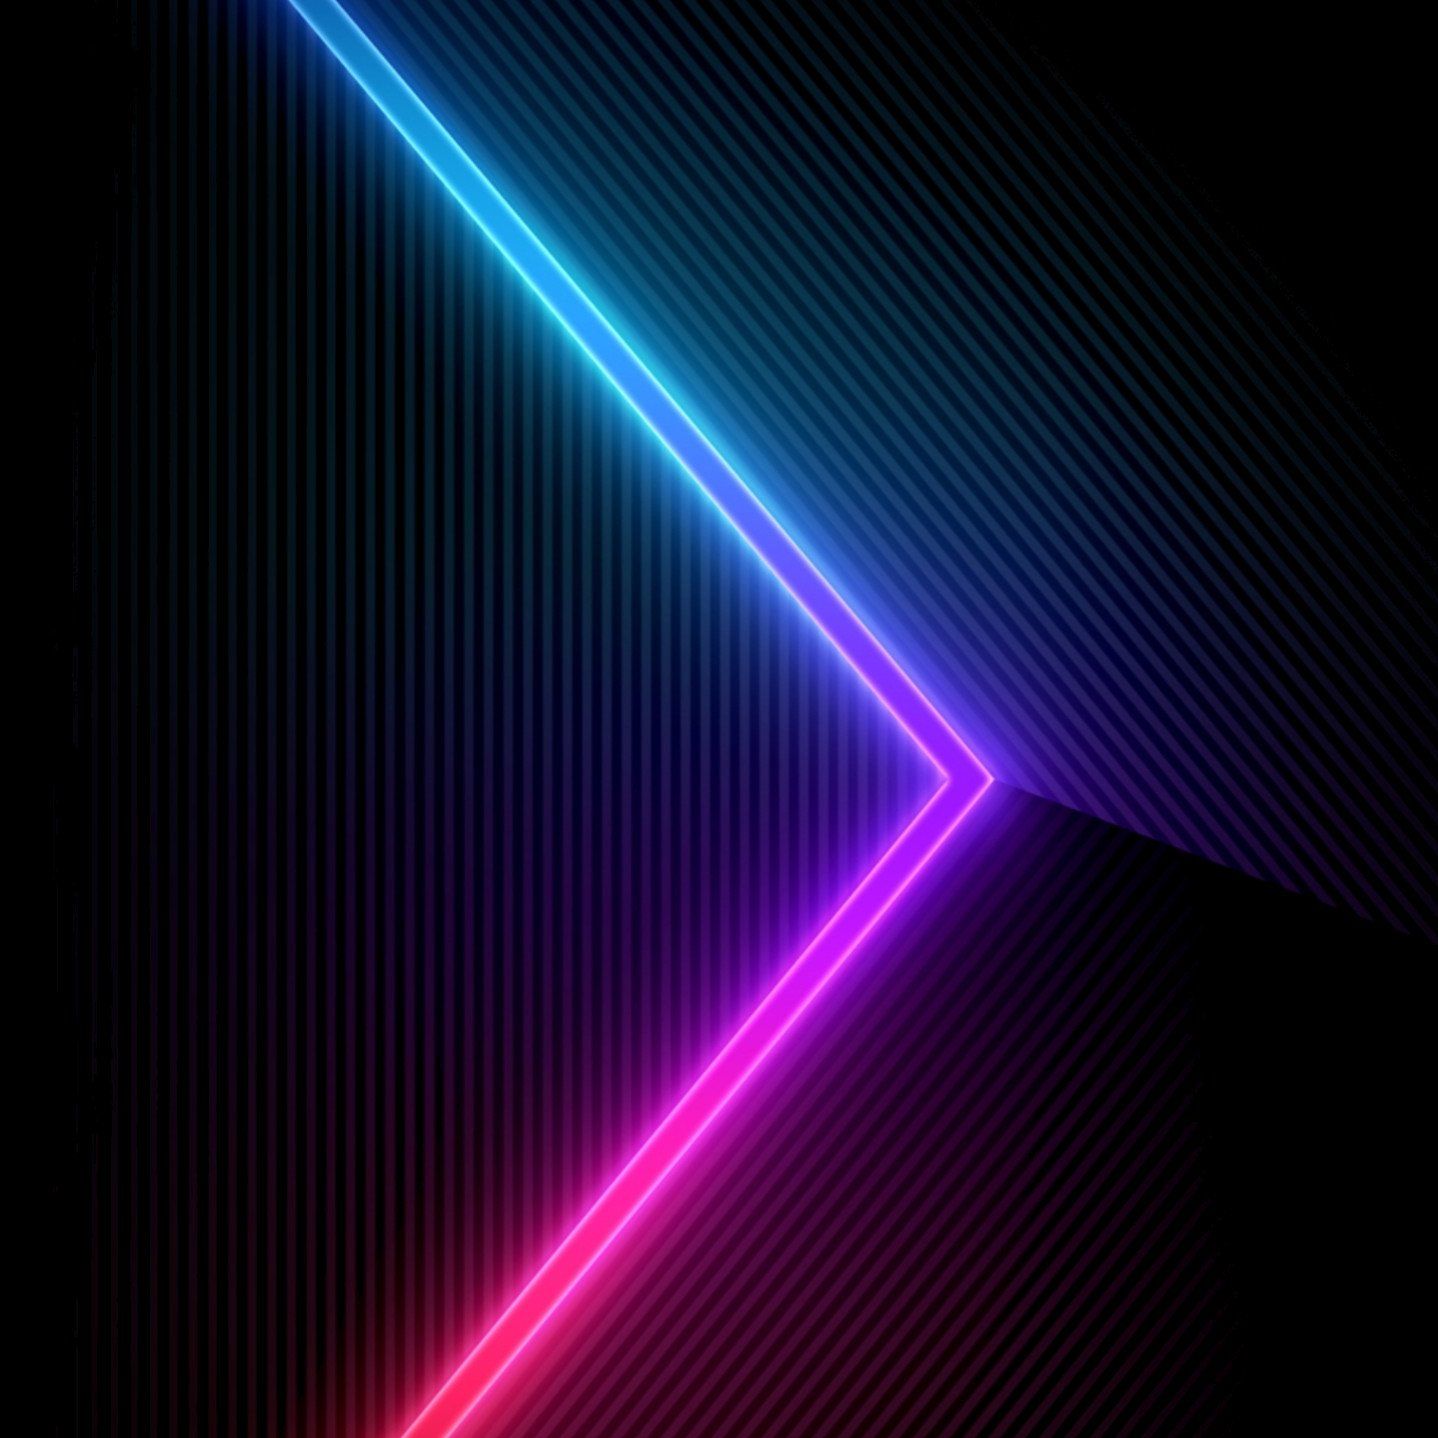 Best Galaxy S10 And SHole Punch Wallpaper. Android